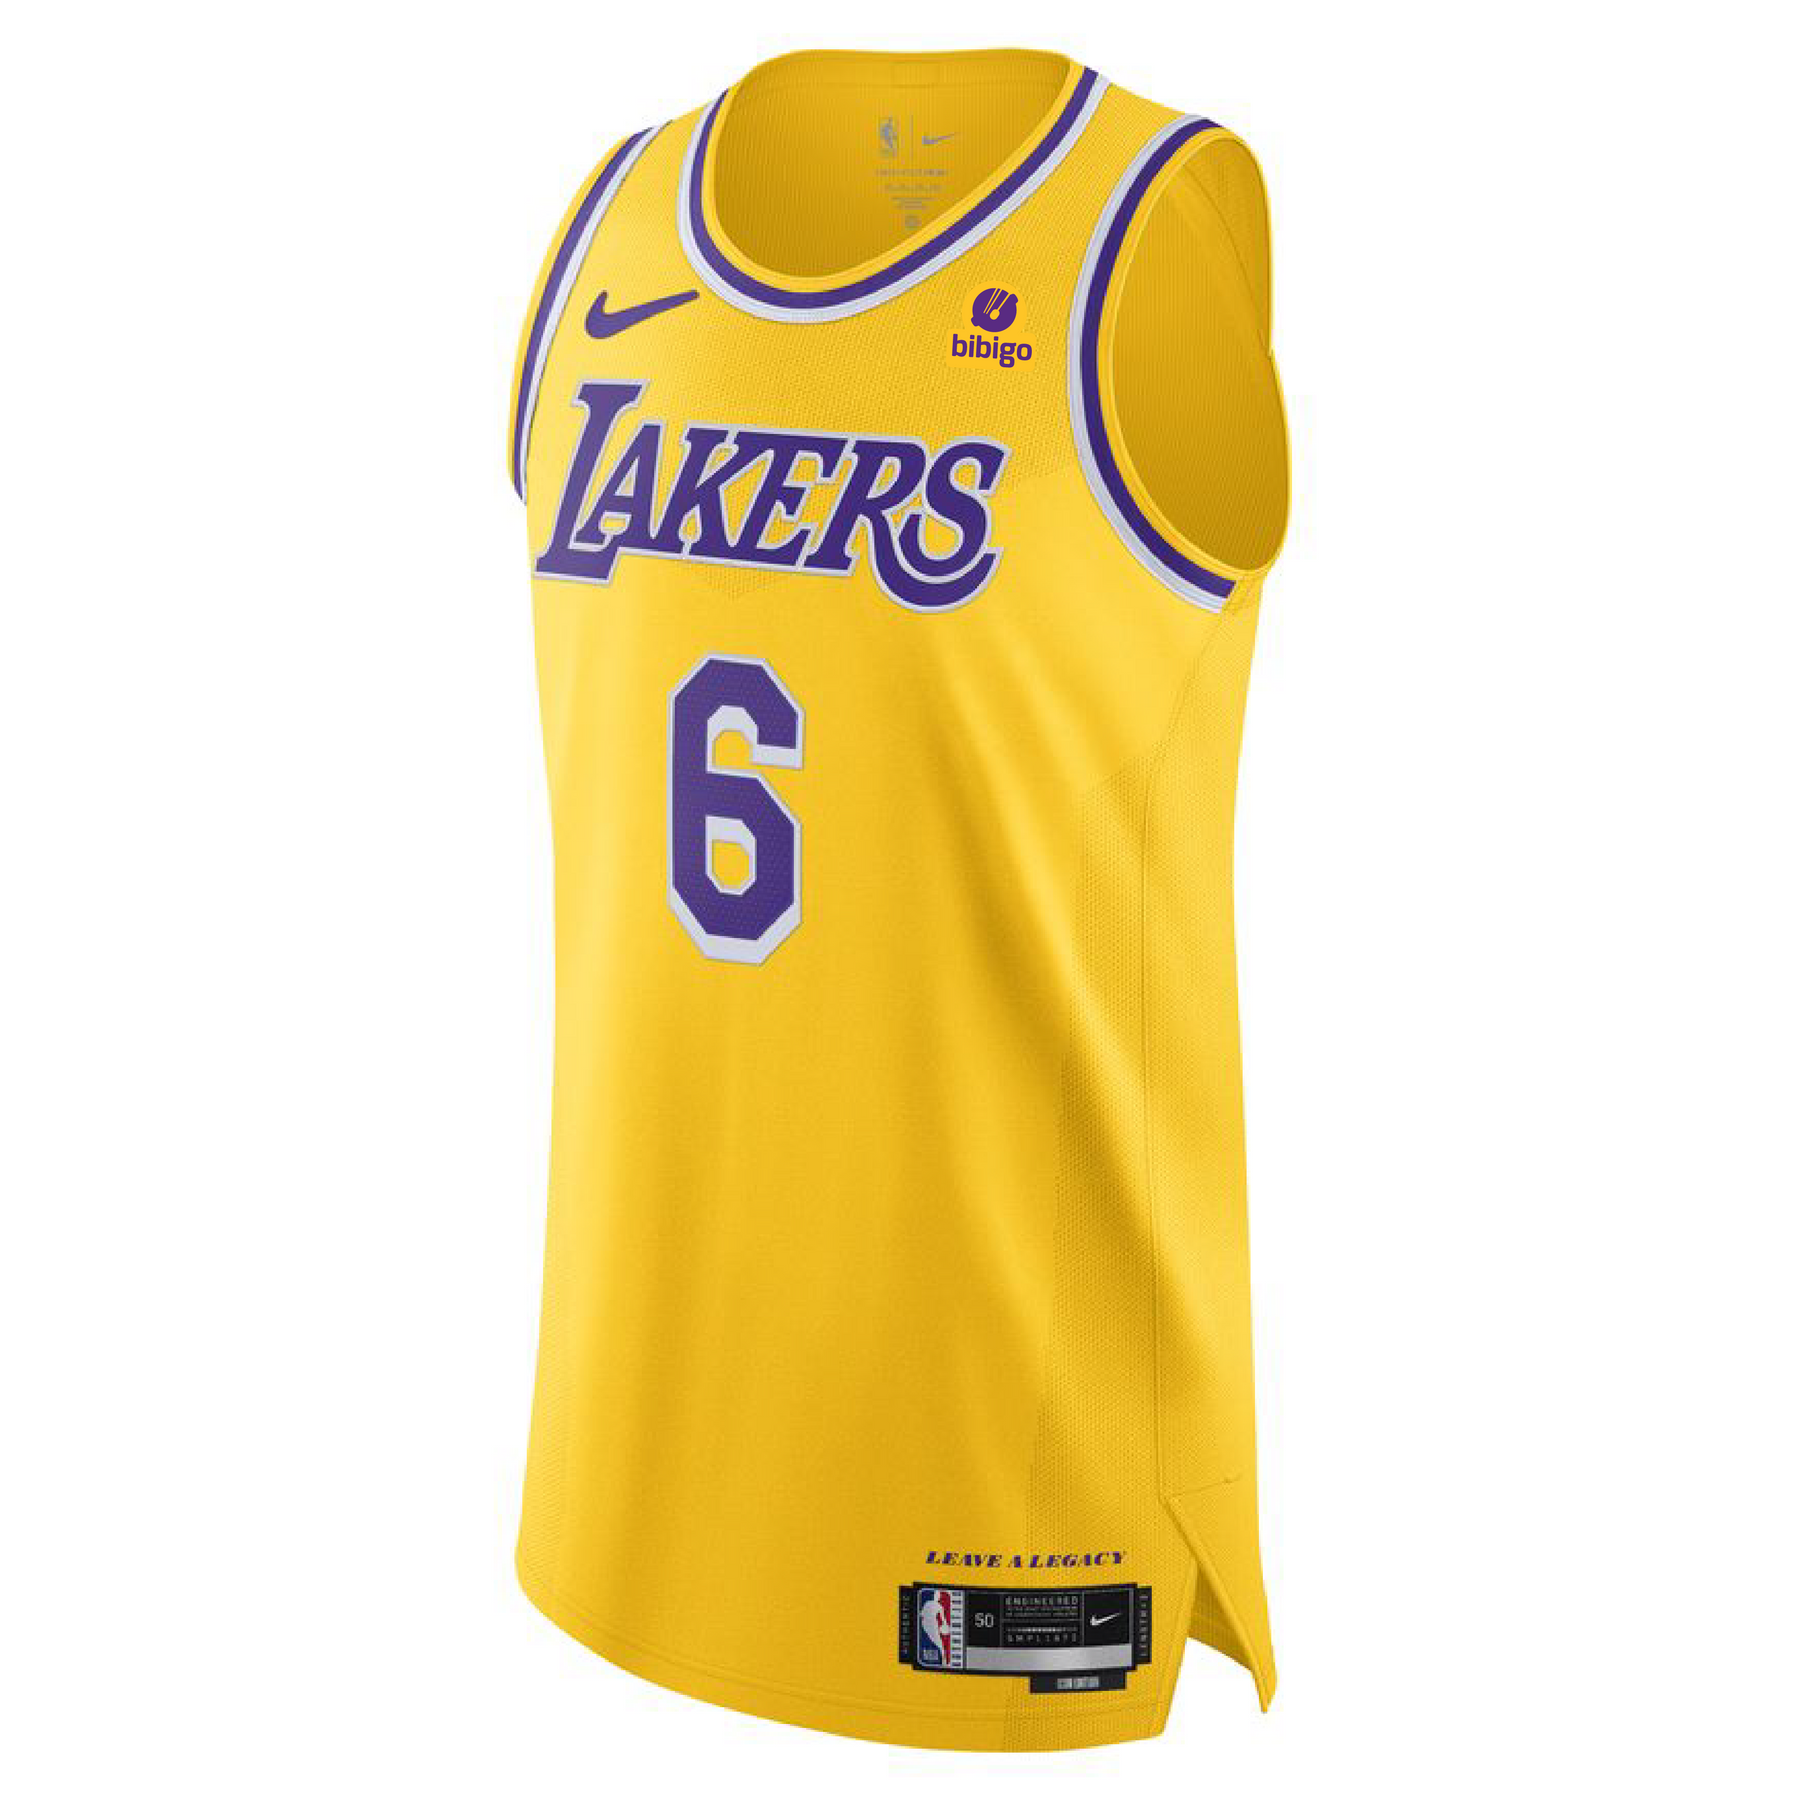 Lakers Store (Lakersstore)  Official Pinterest account